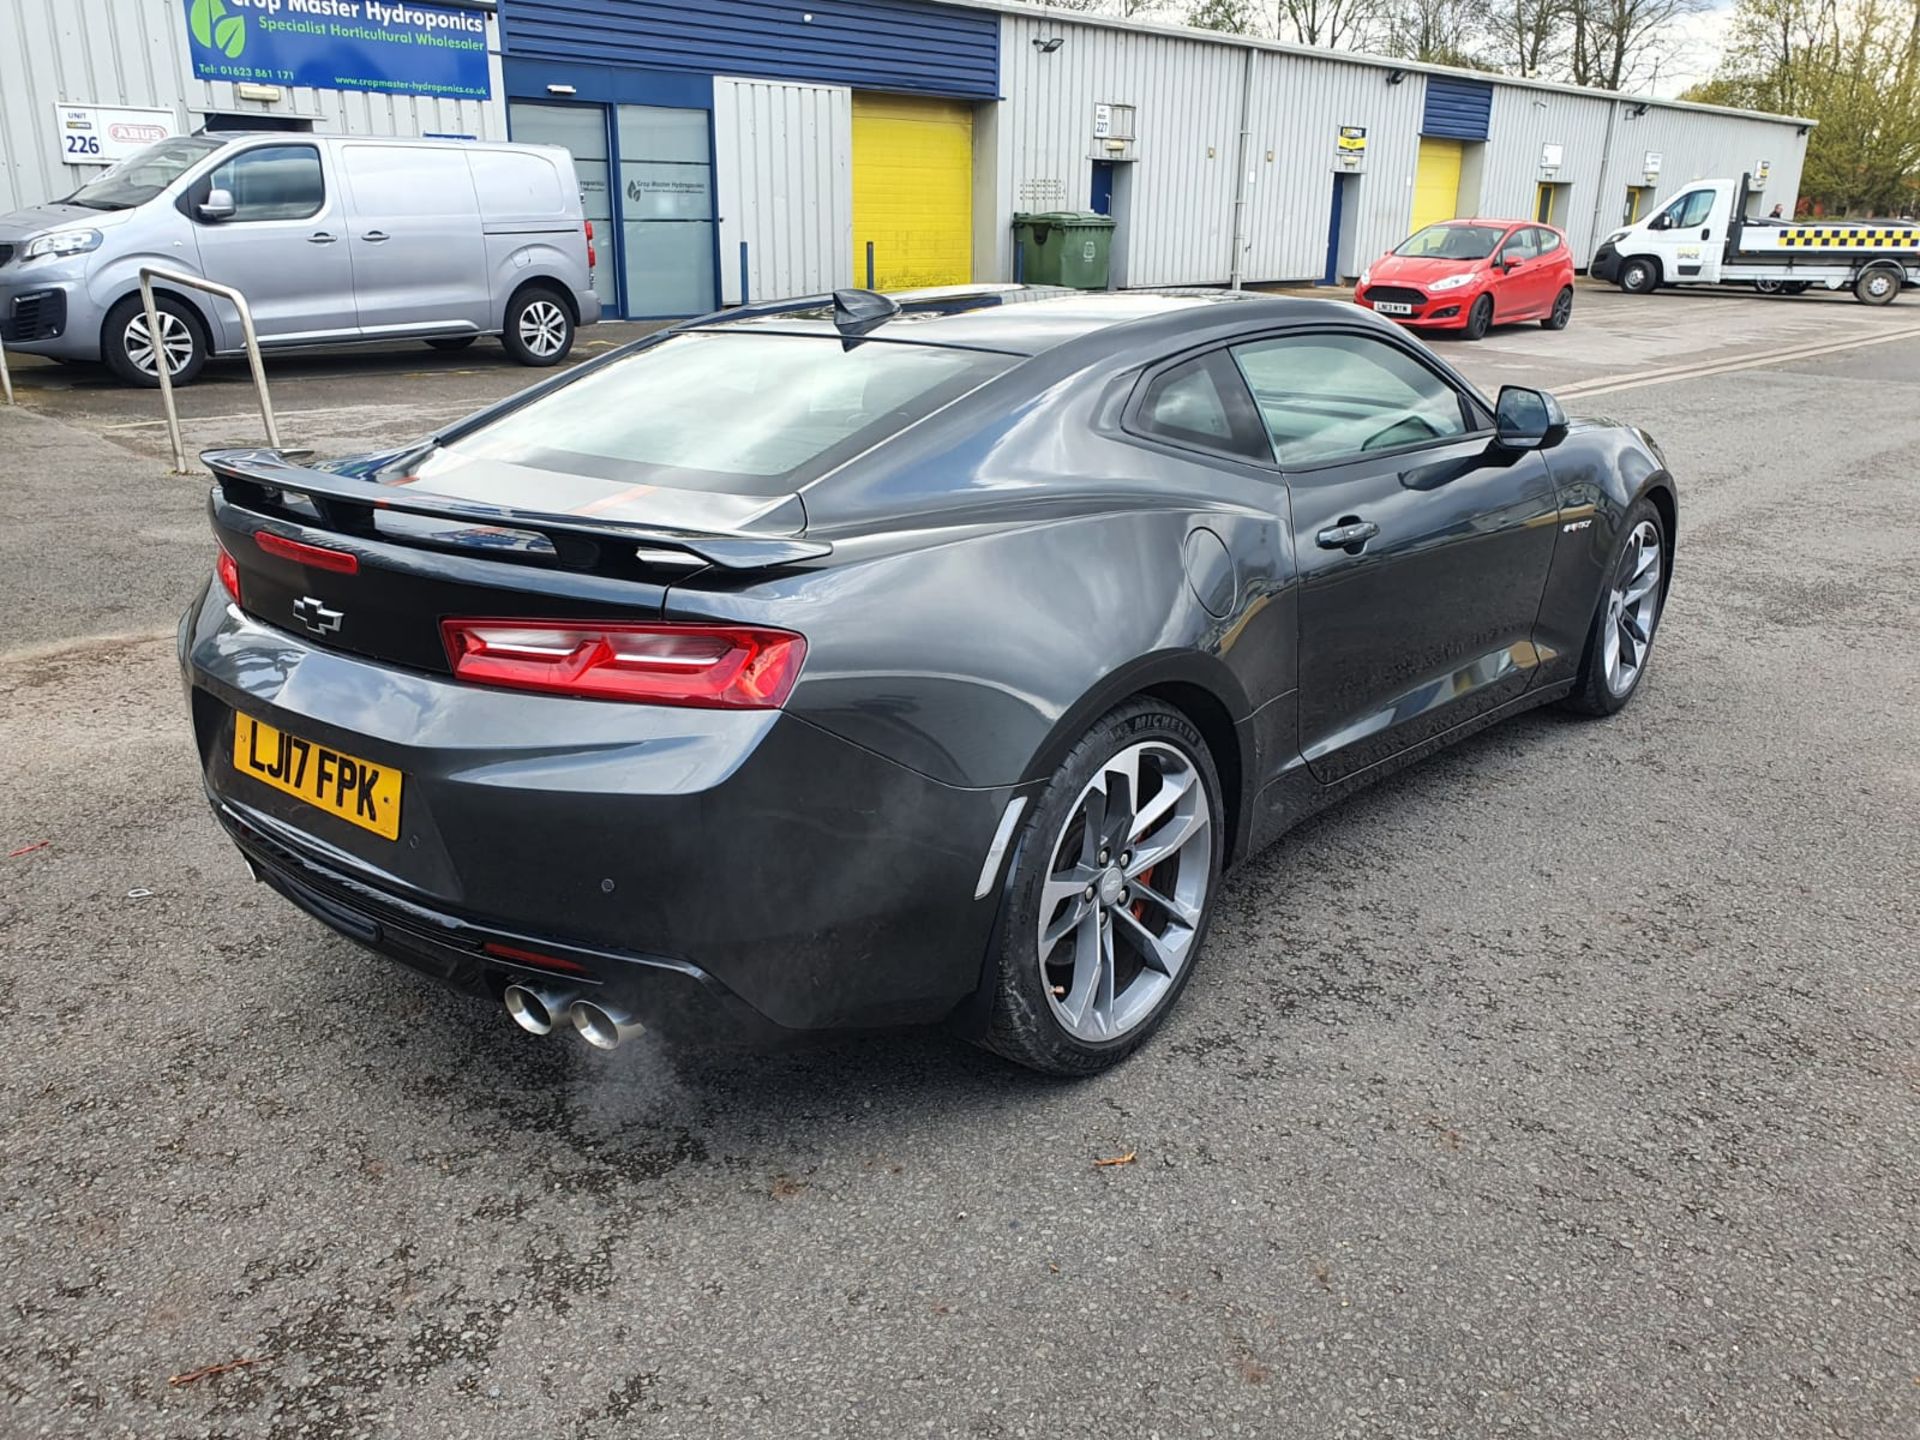 2017/17 REG CHEVROLET CAMARO V8 AUTOMATIC GREY COUPE 50th ANNIVERSARY EDITION, LHD, LOW MILEAGE - Image 11 of 43